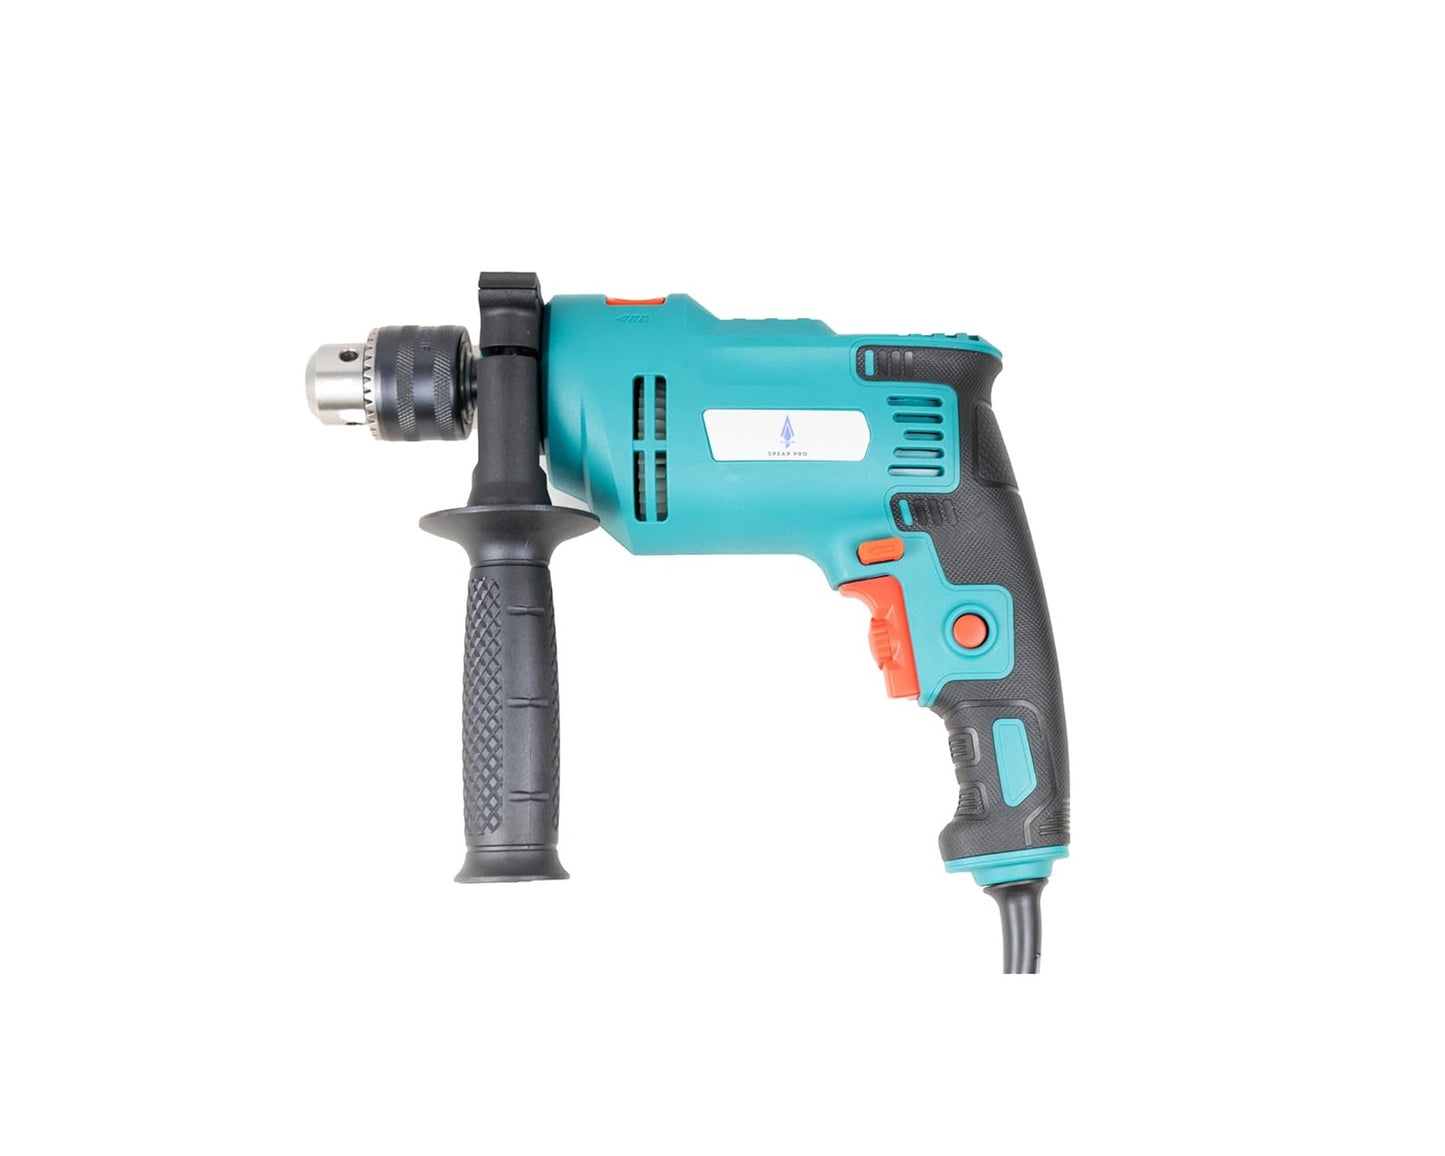 SPEAR SPP-13RE 1400W 13mm Chuck Impact Drill: Ideal for Home and Professional Applications, Copper Armature, Variable Speed, Forward/Reverse, Lock-On Switch (0-3000rpm)